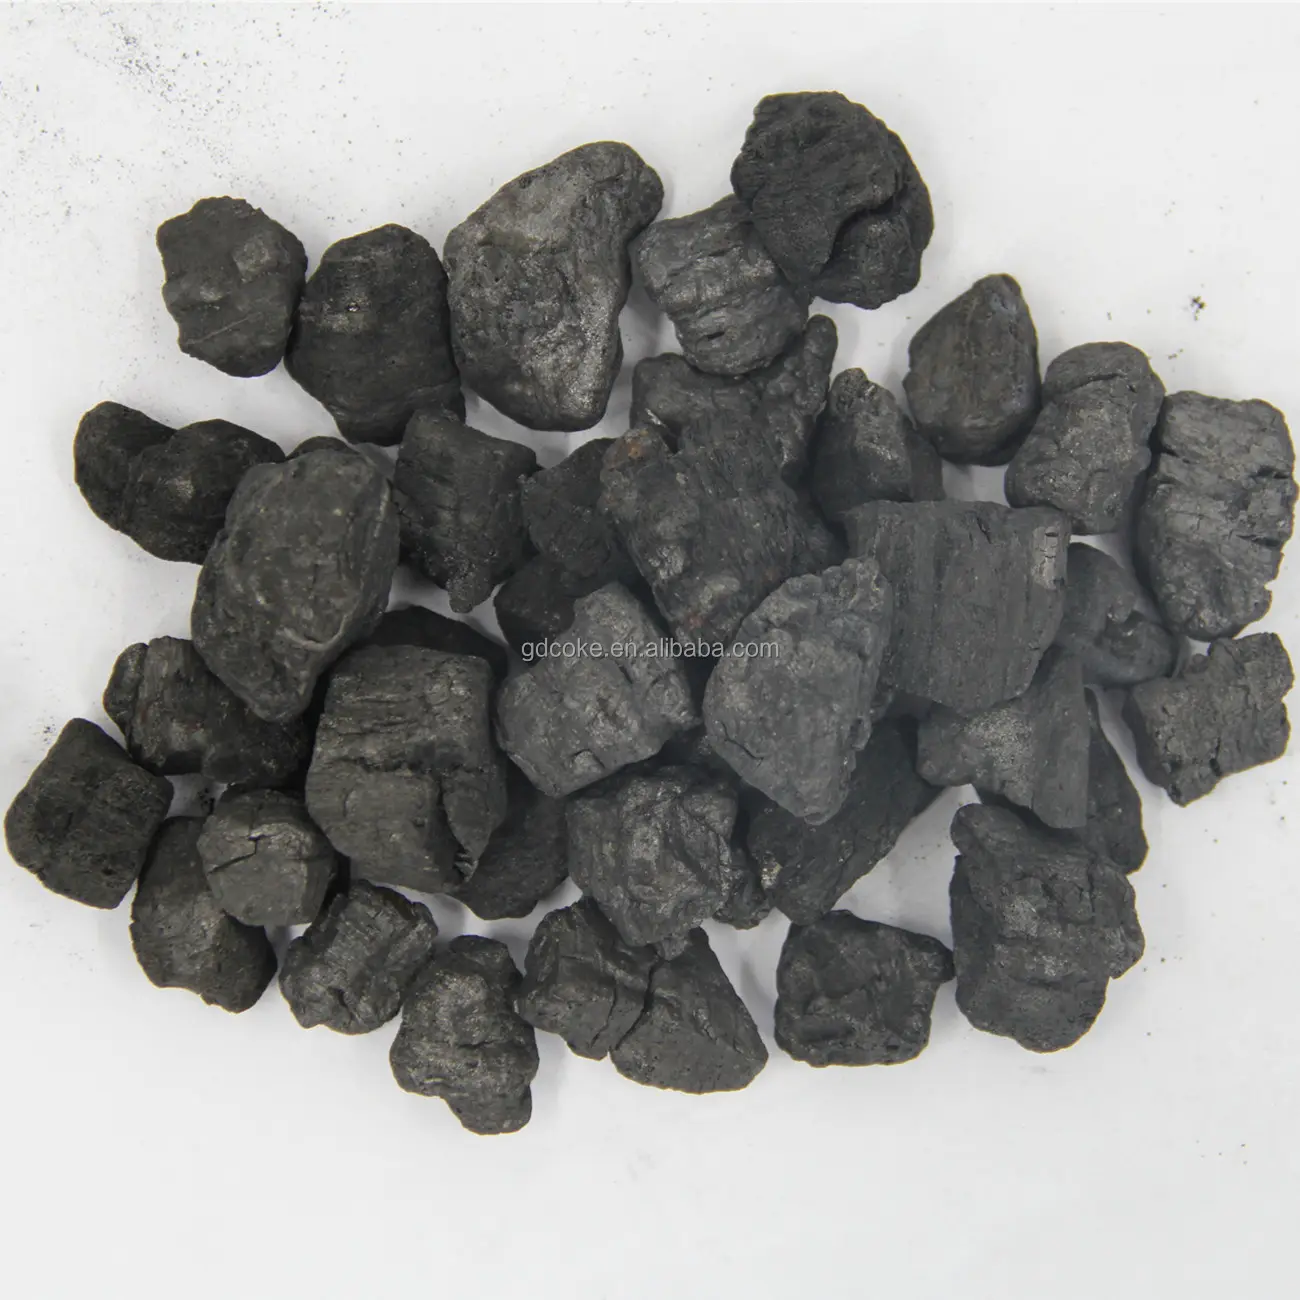 Met coke for sale made with China high quality coal